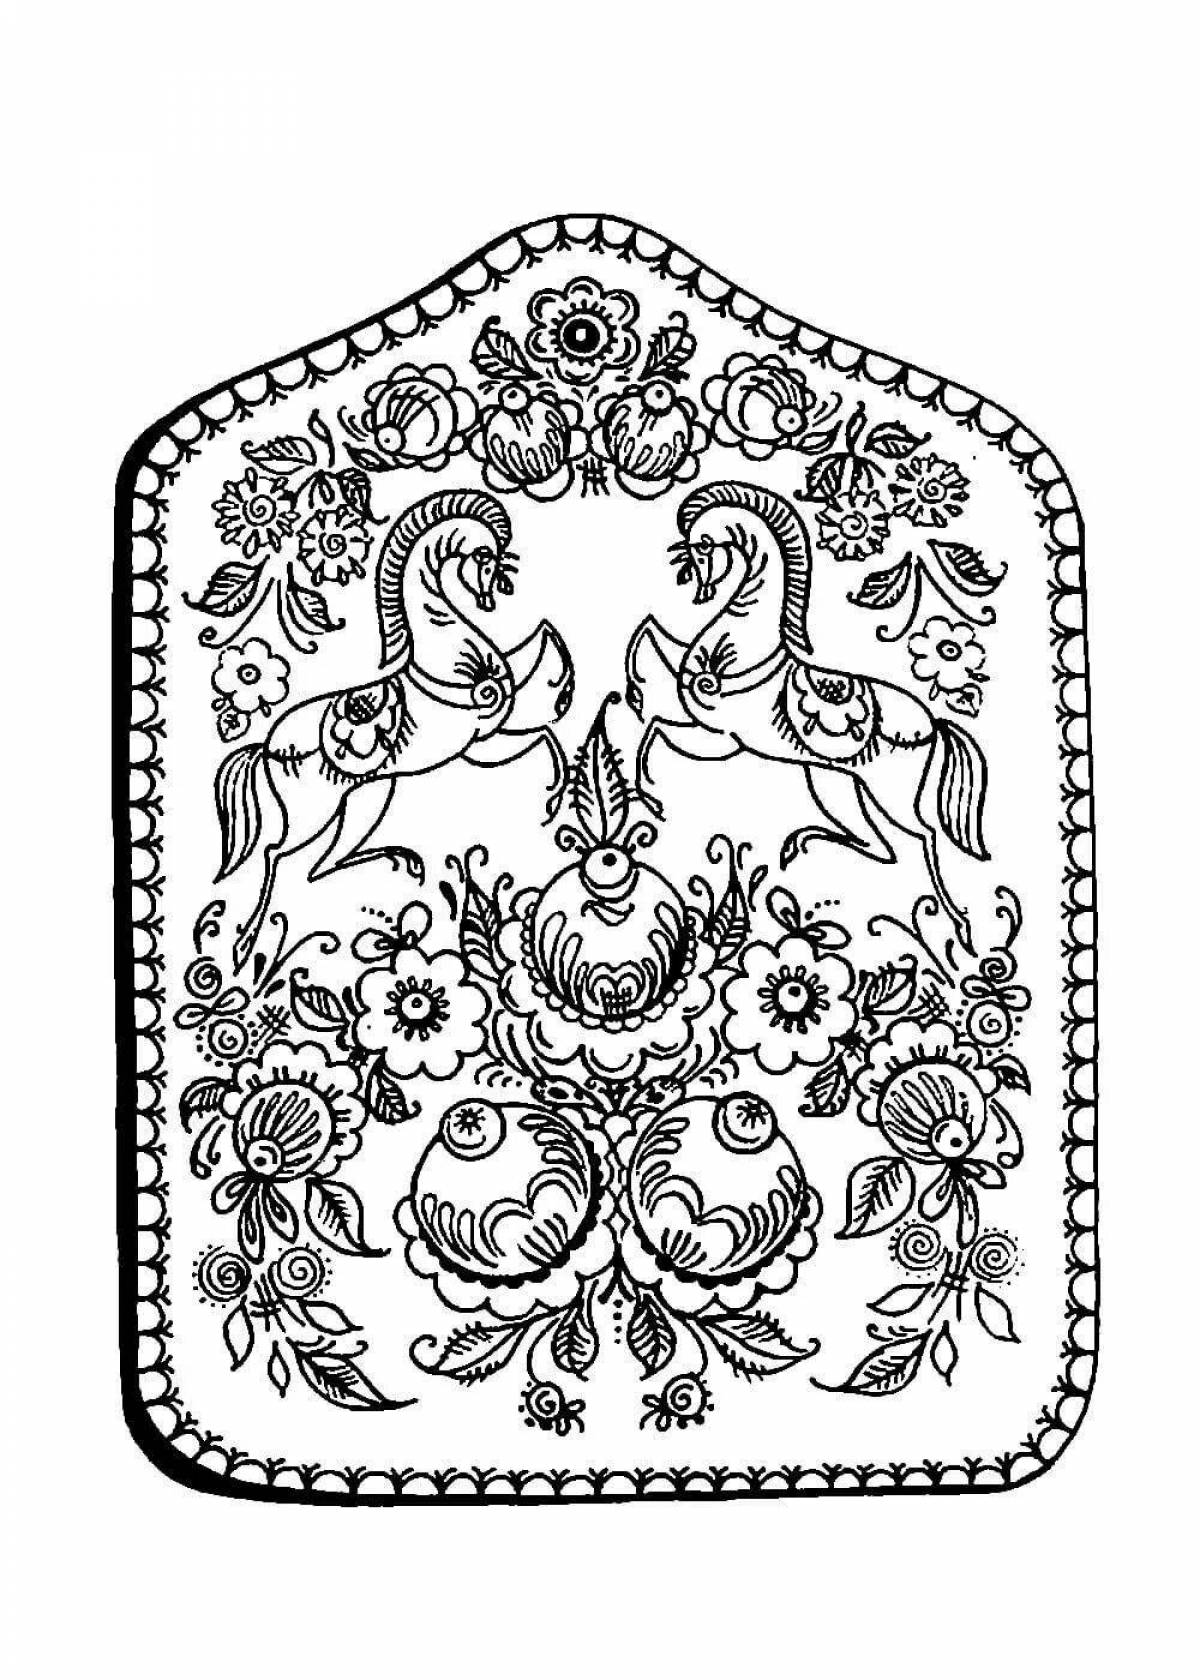 Coloring page fancy russian ornament